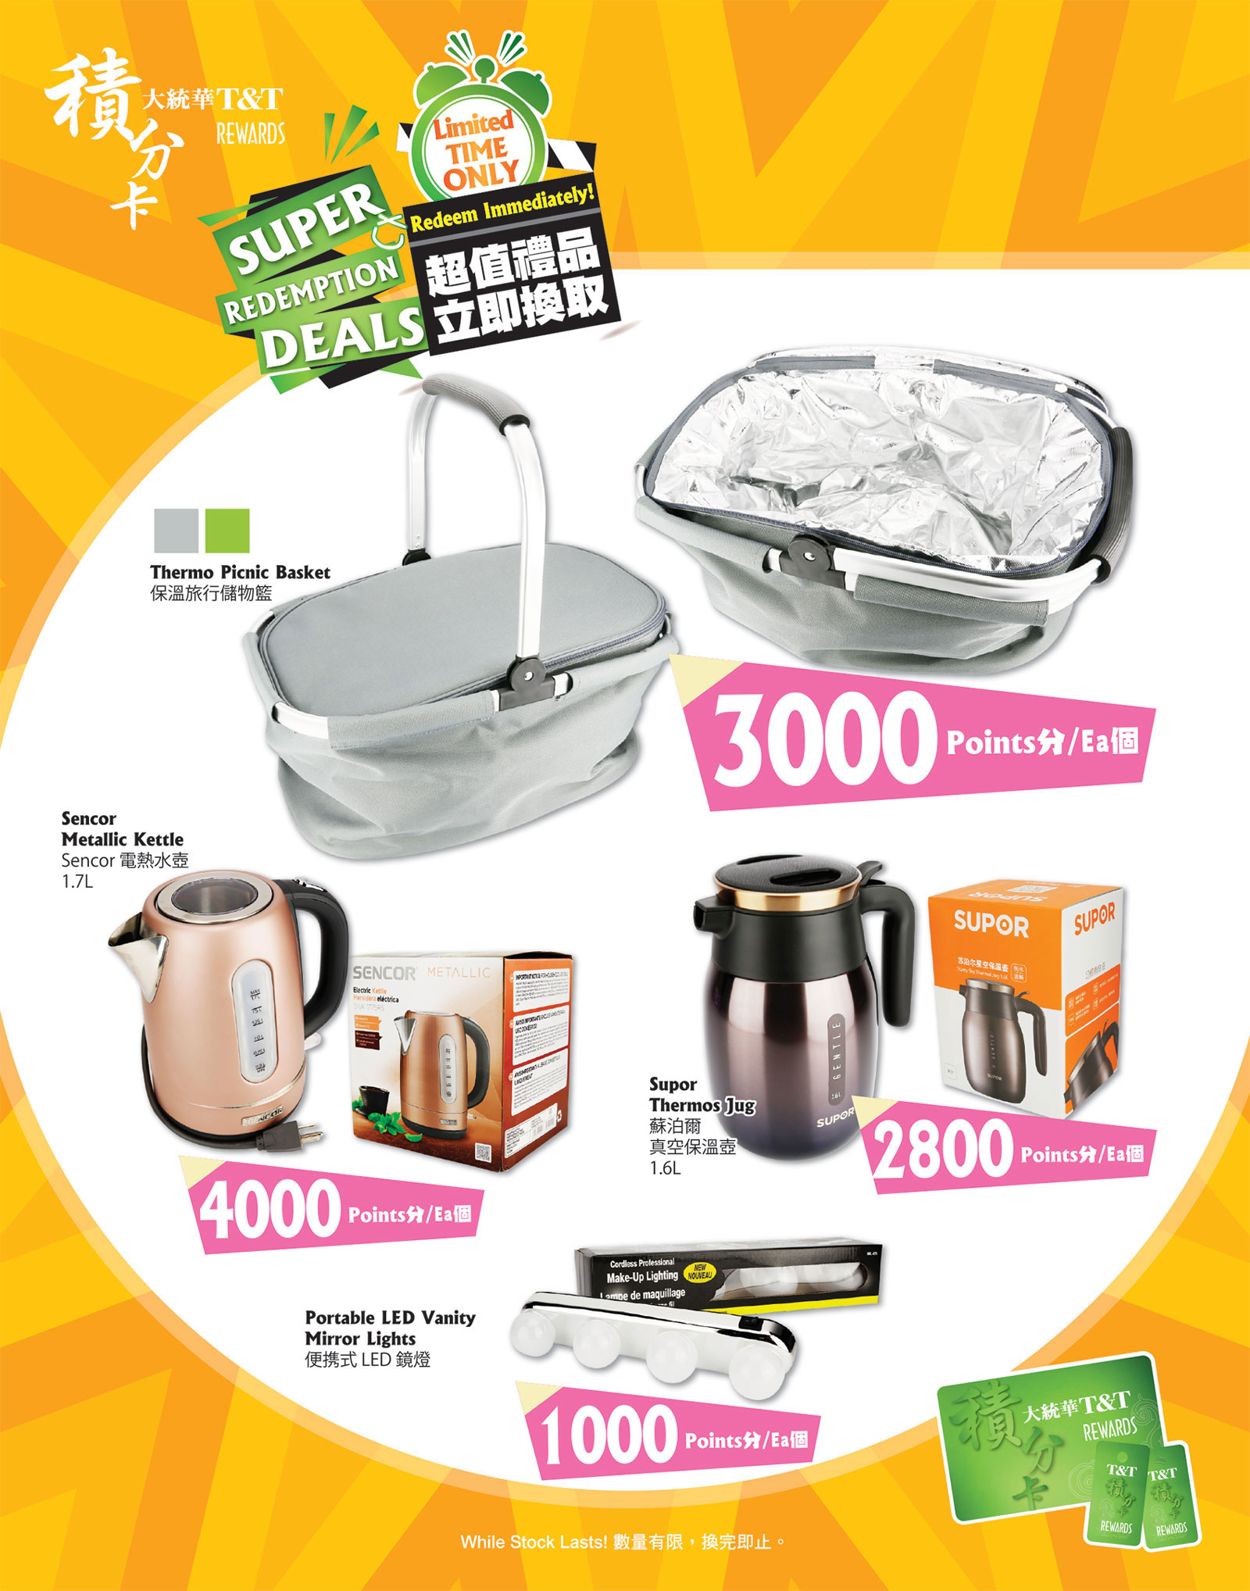 T&T Supermarket Flyer from 07/24/2020